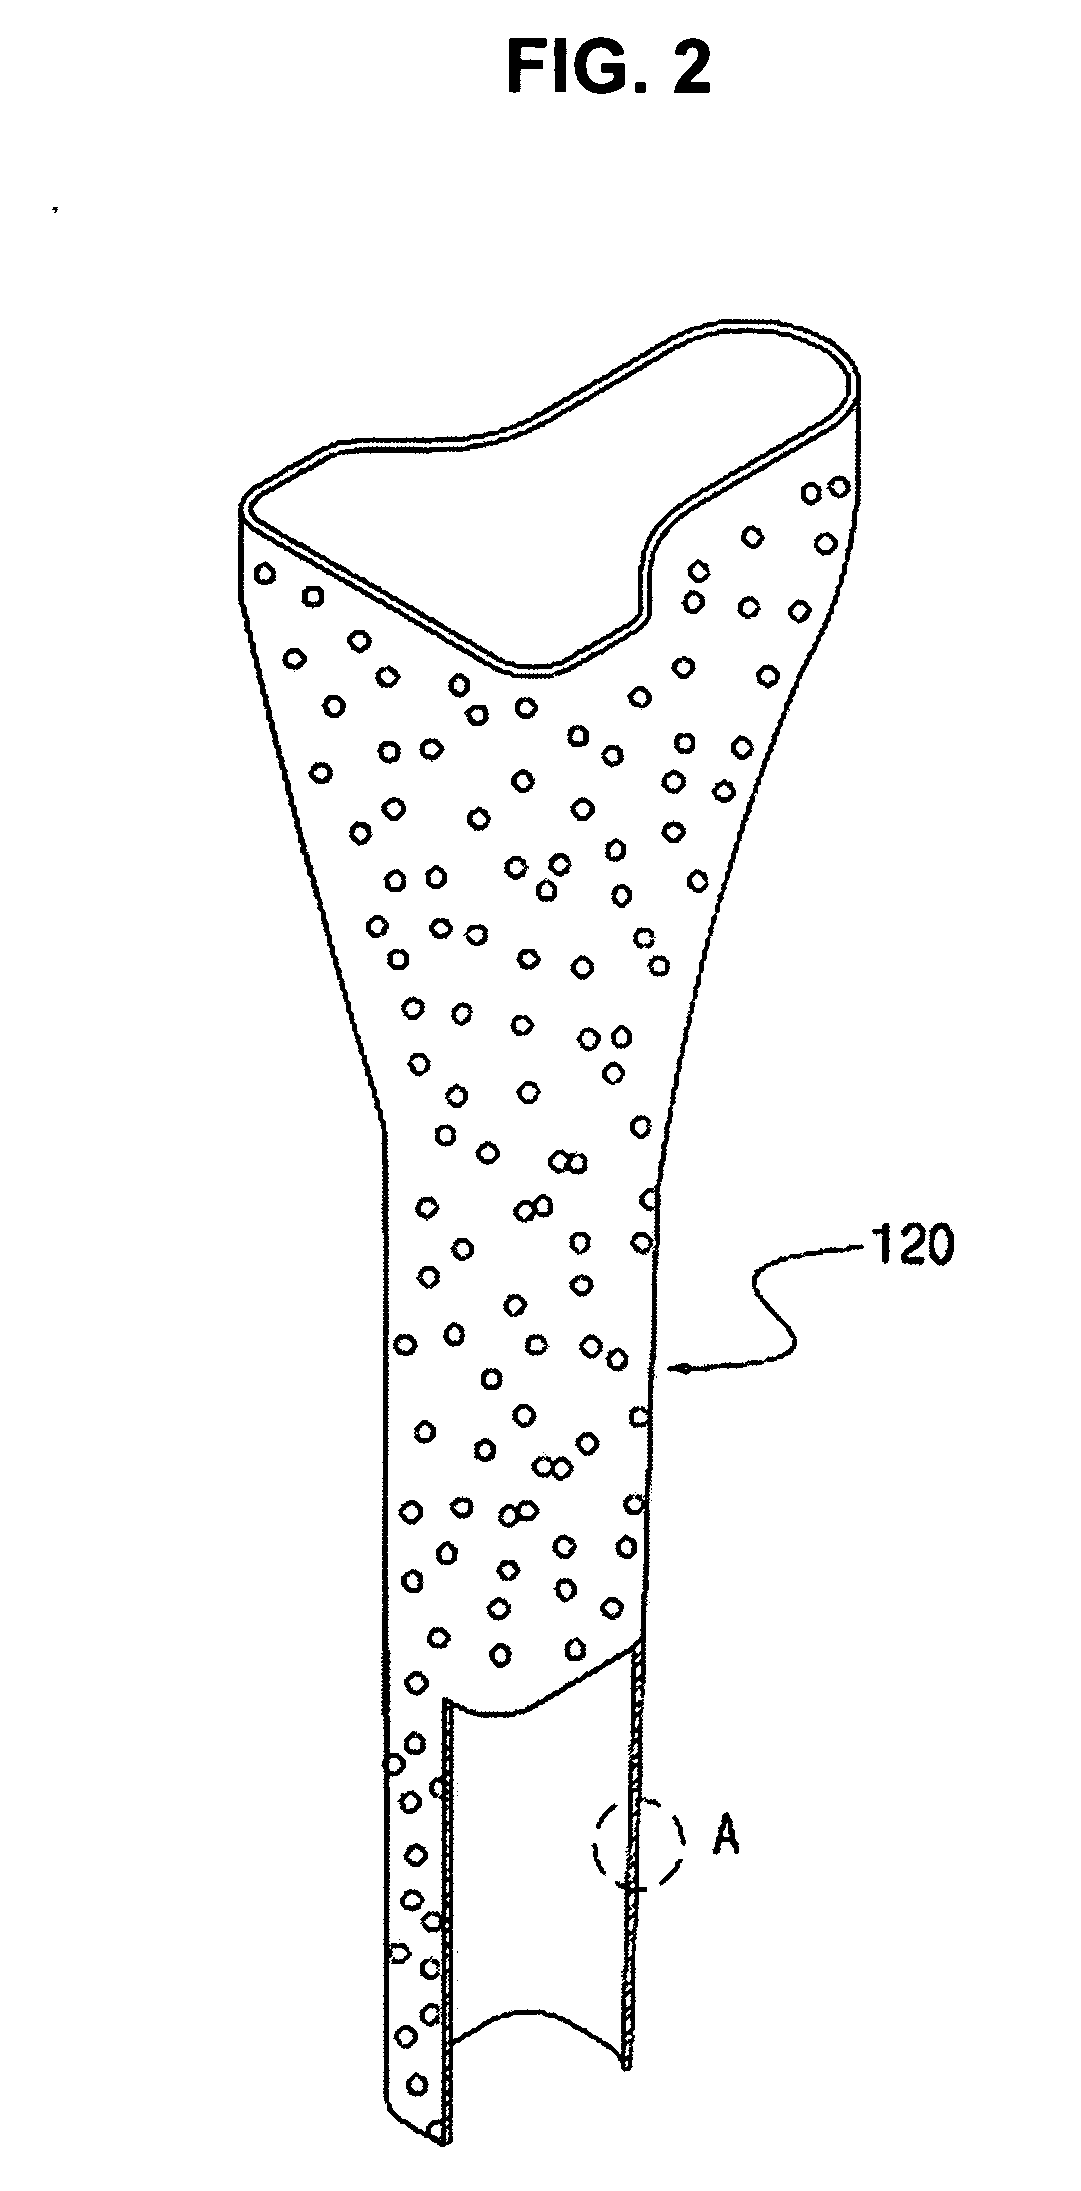 Artificial joint system